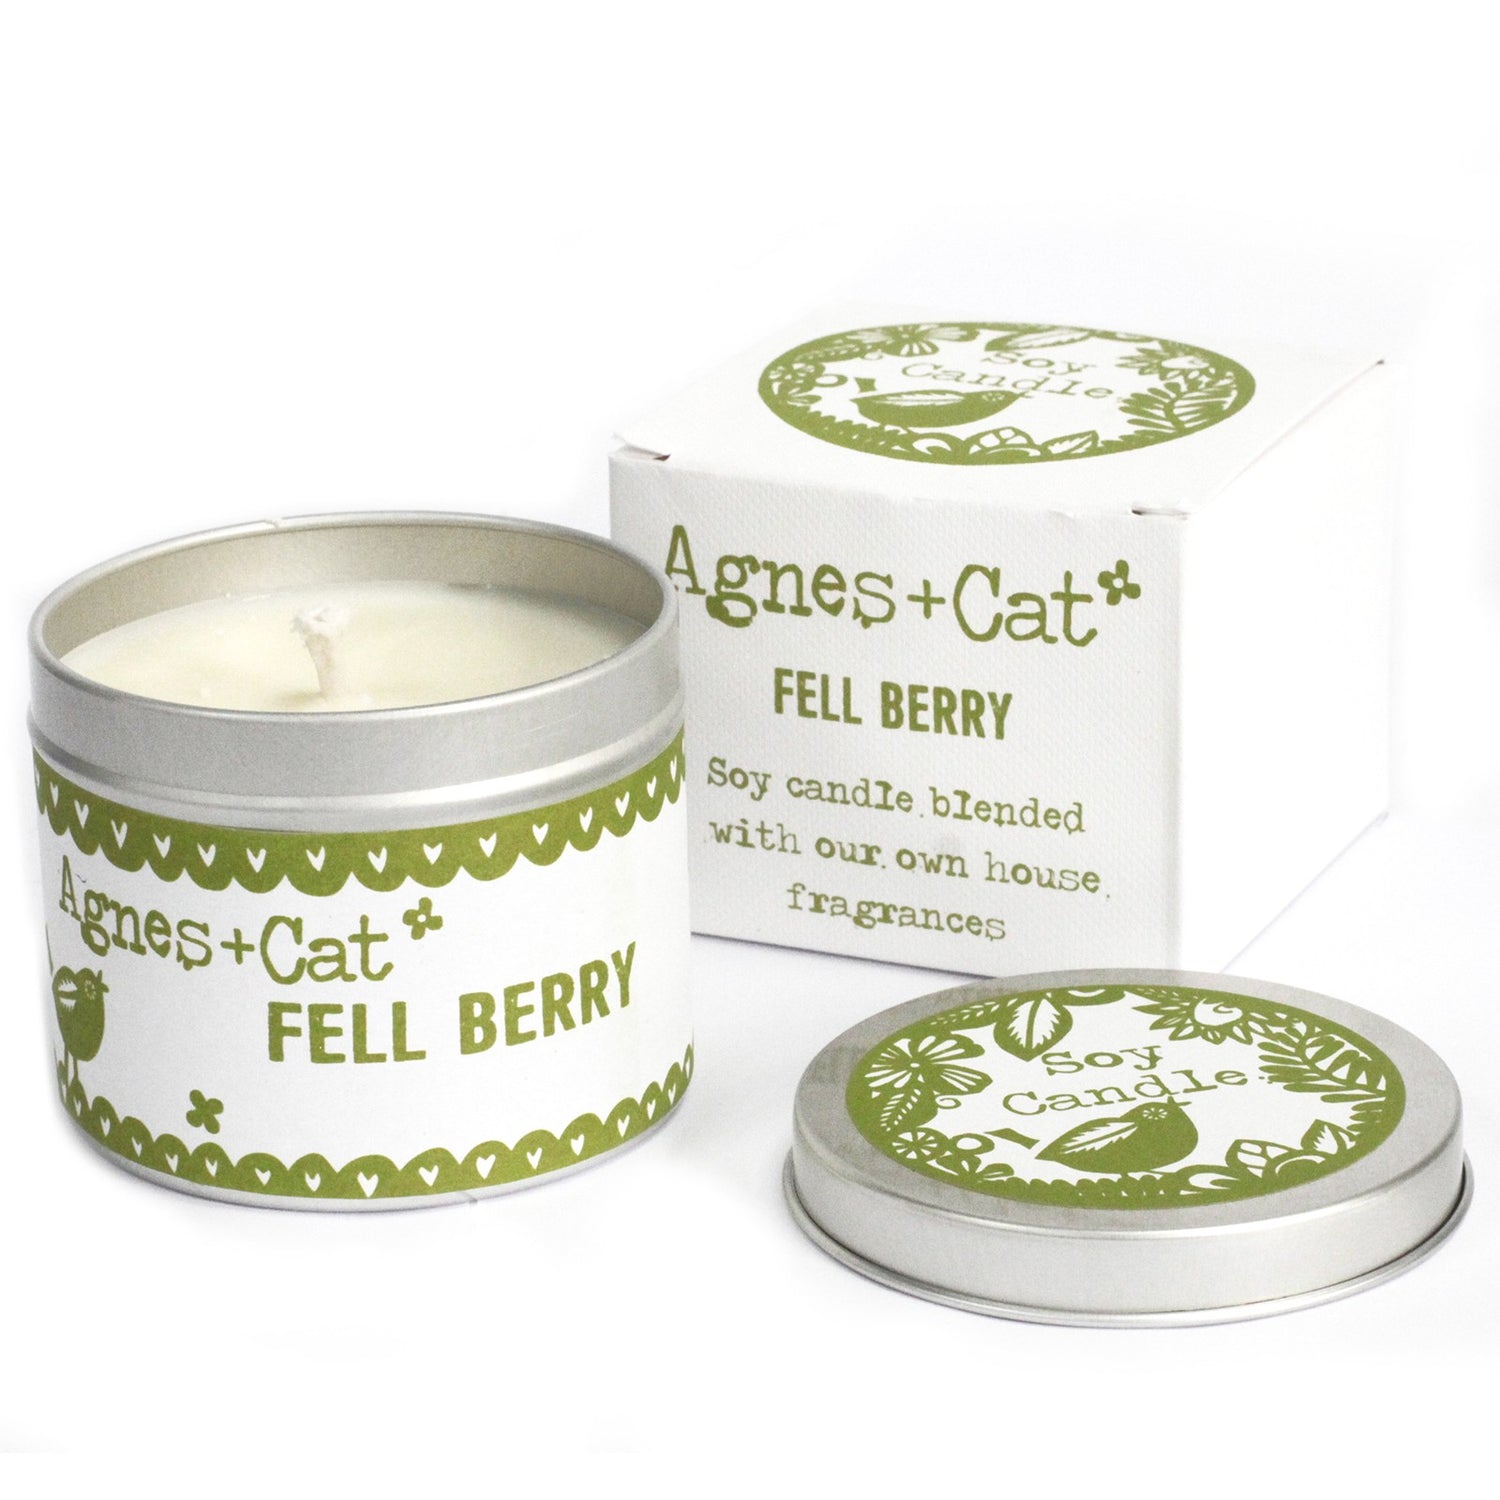 Agnes + Cat Fell Berry Fragranced Soy Wax Tin Candle